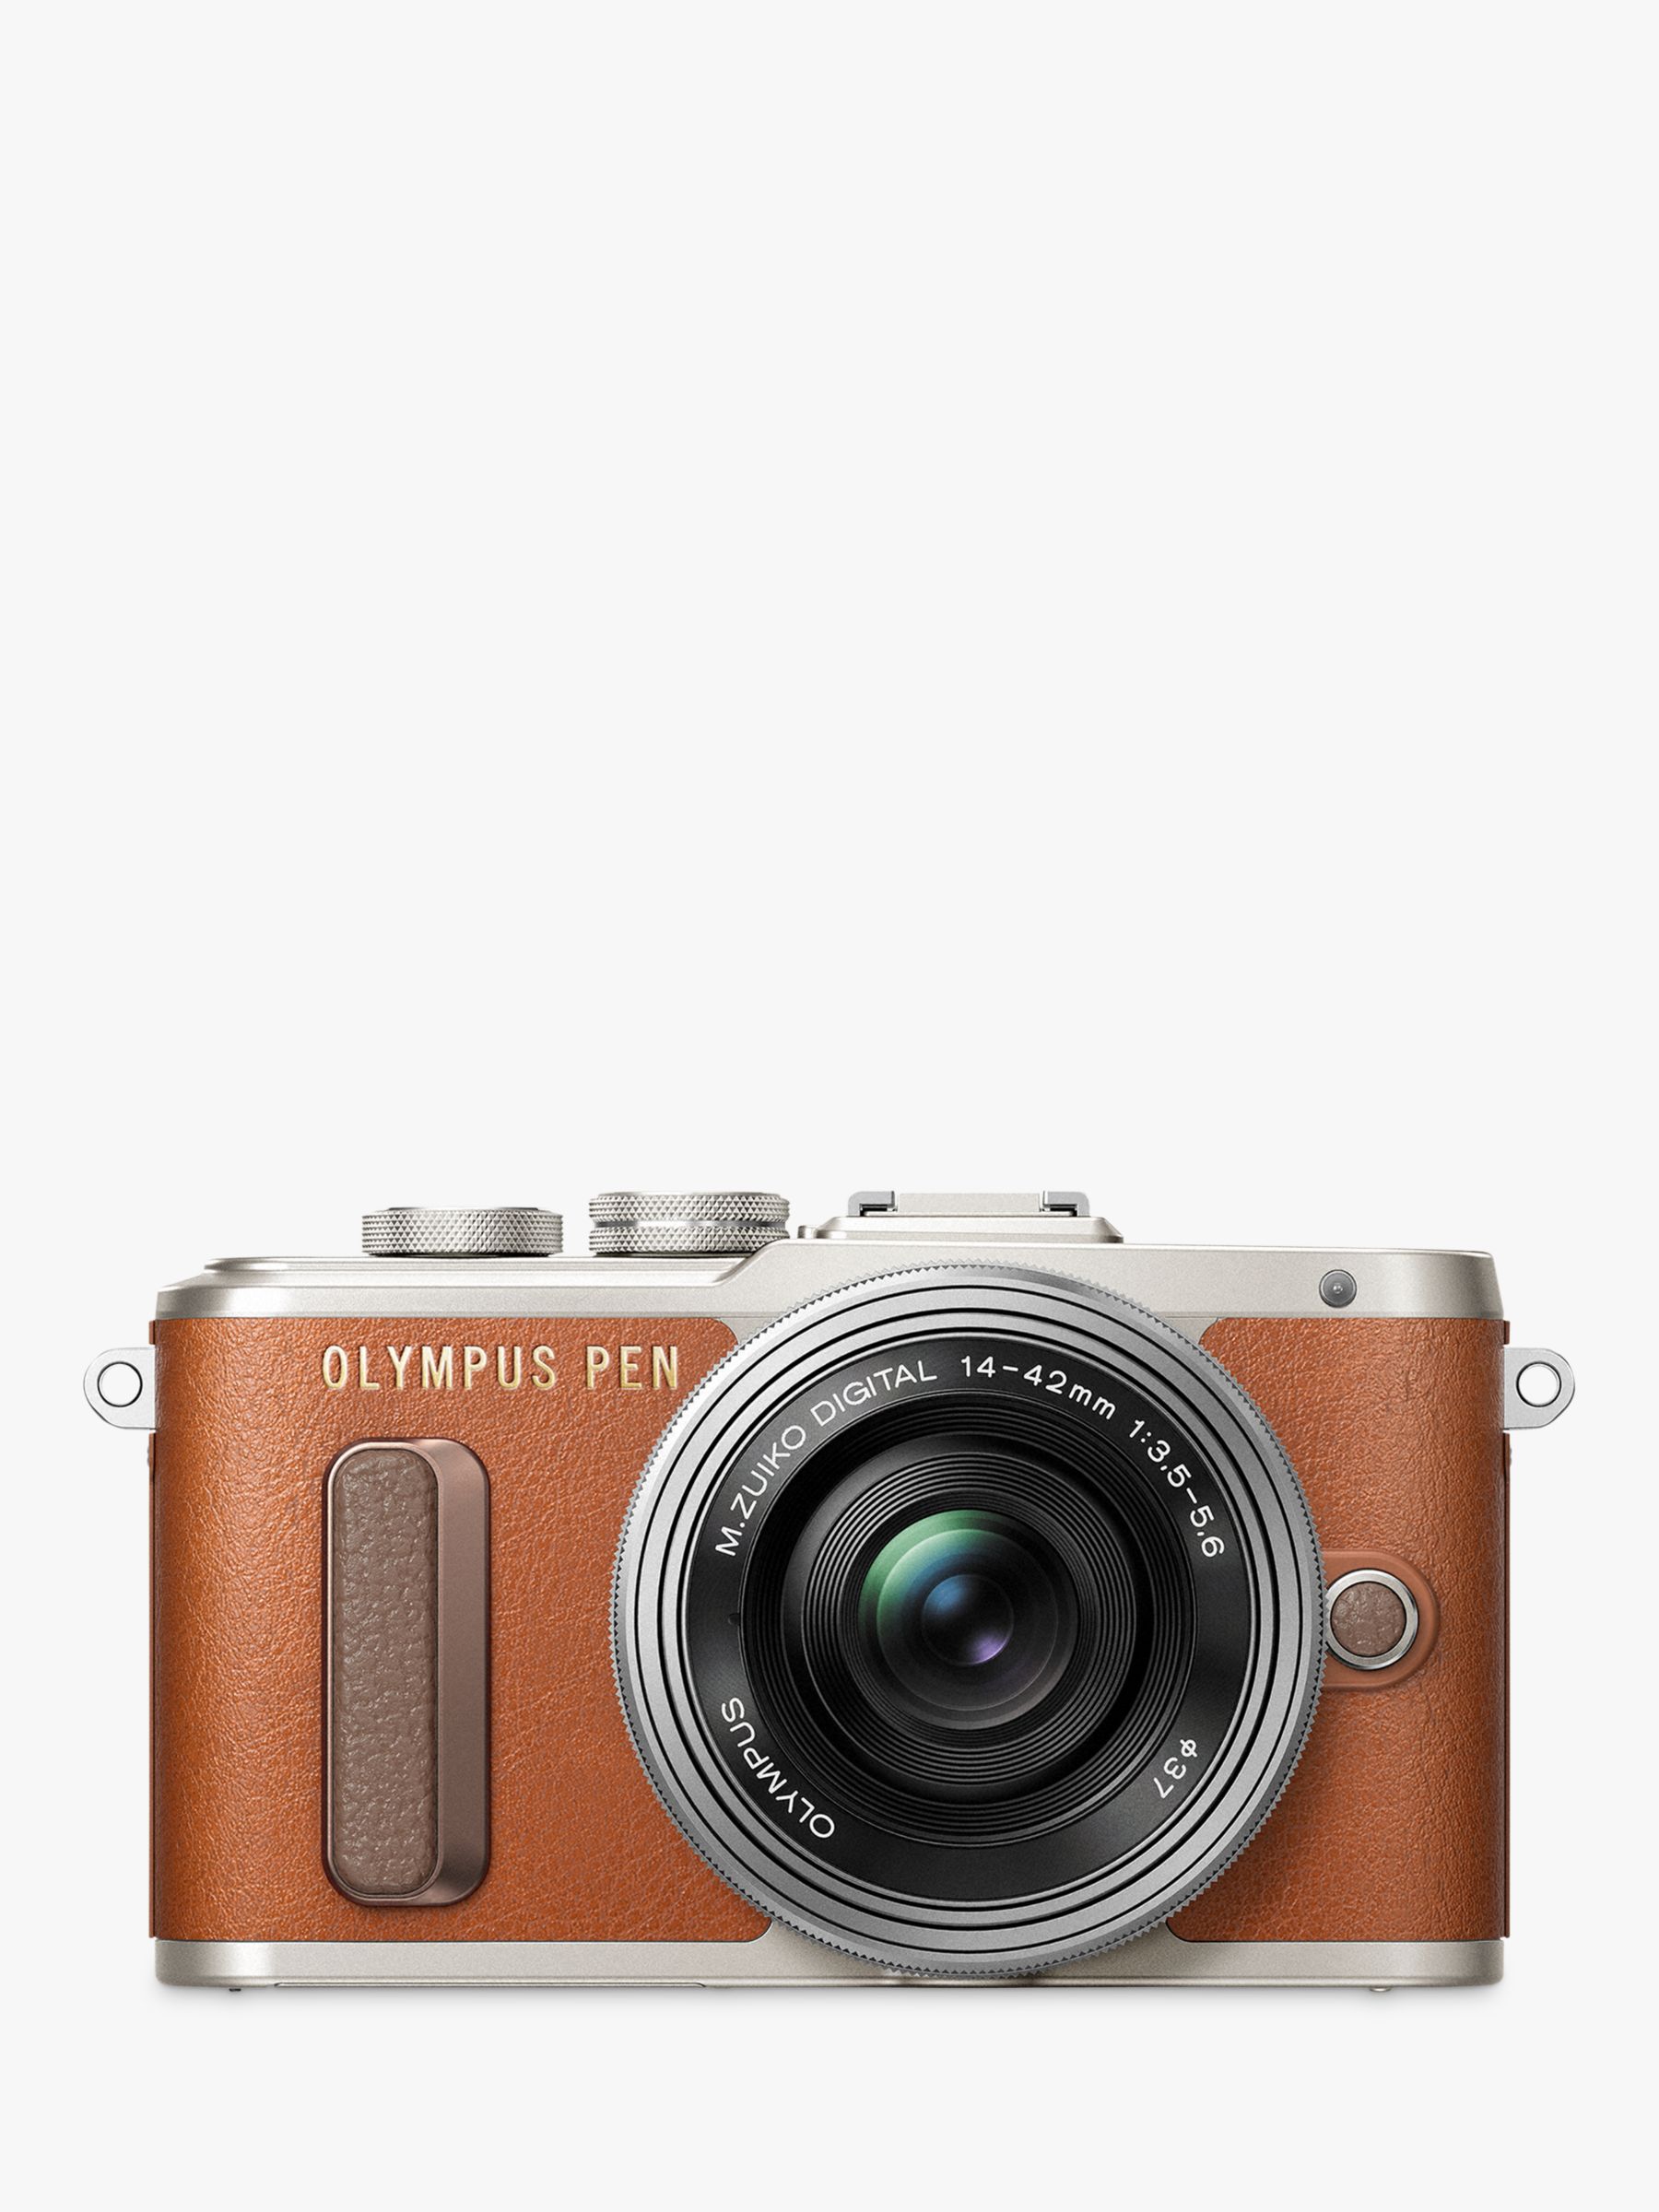 Olympus PEN E-PL8 Compact System Camera with 14-42mm EZ Lens, HD 1080p, 16.1MP, 3 LCD Touch Screen, Tan